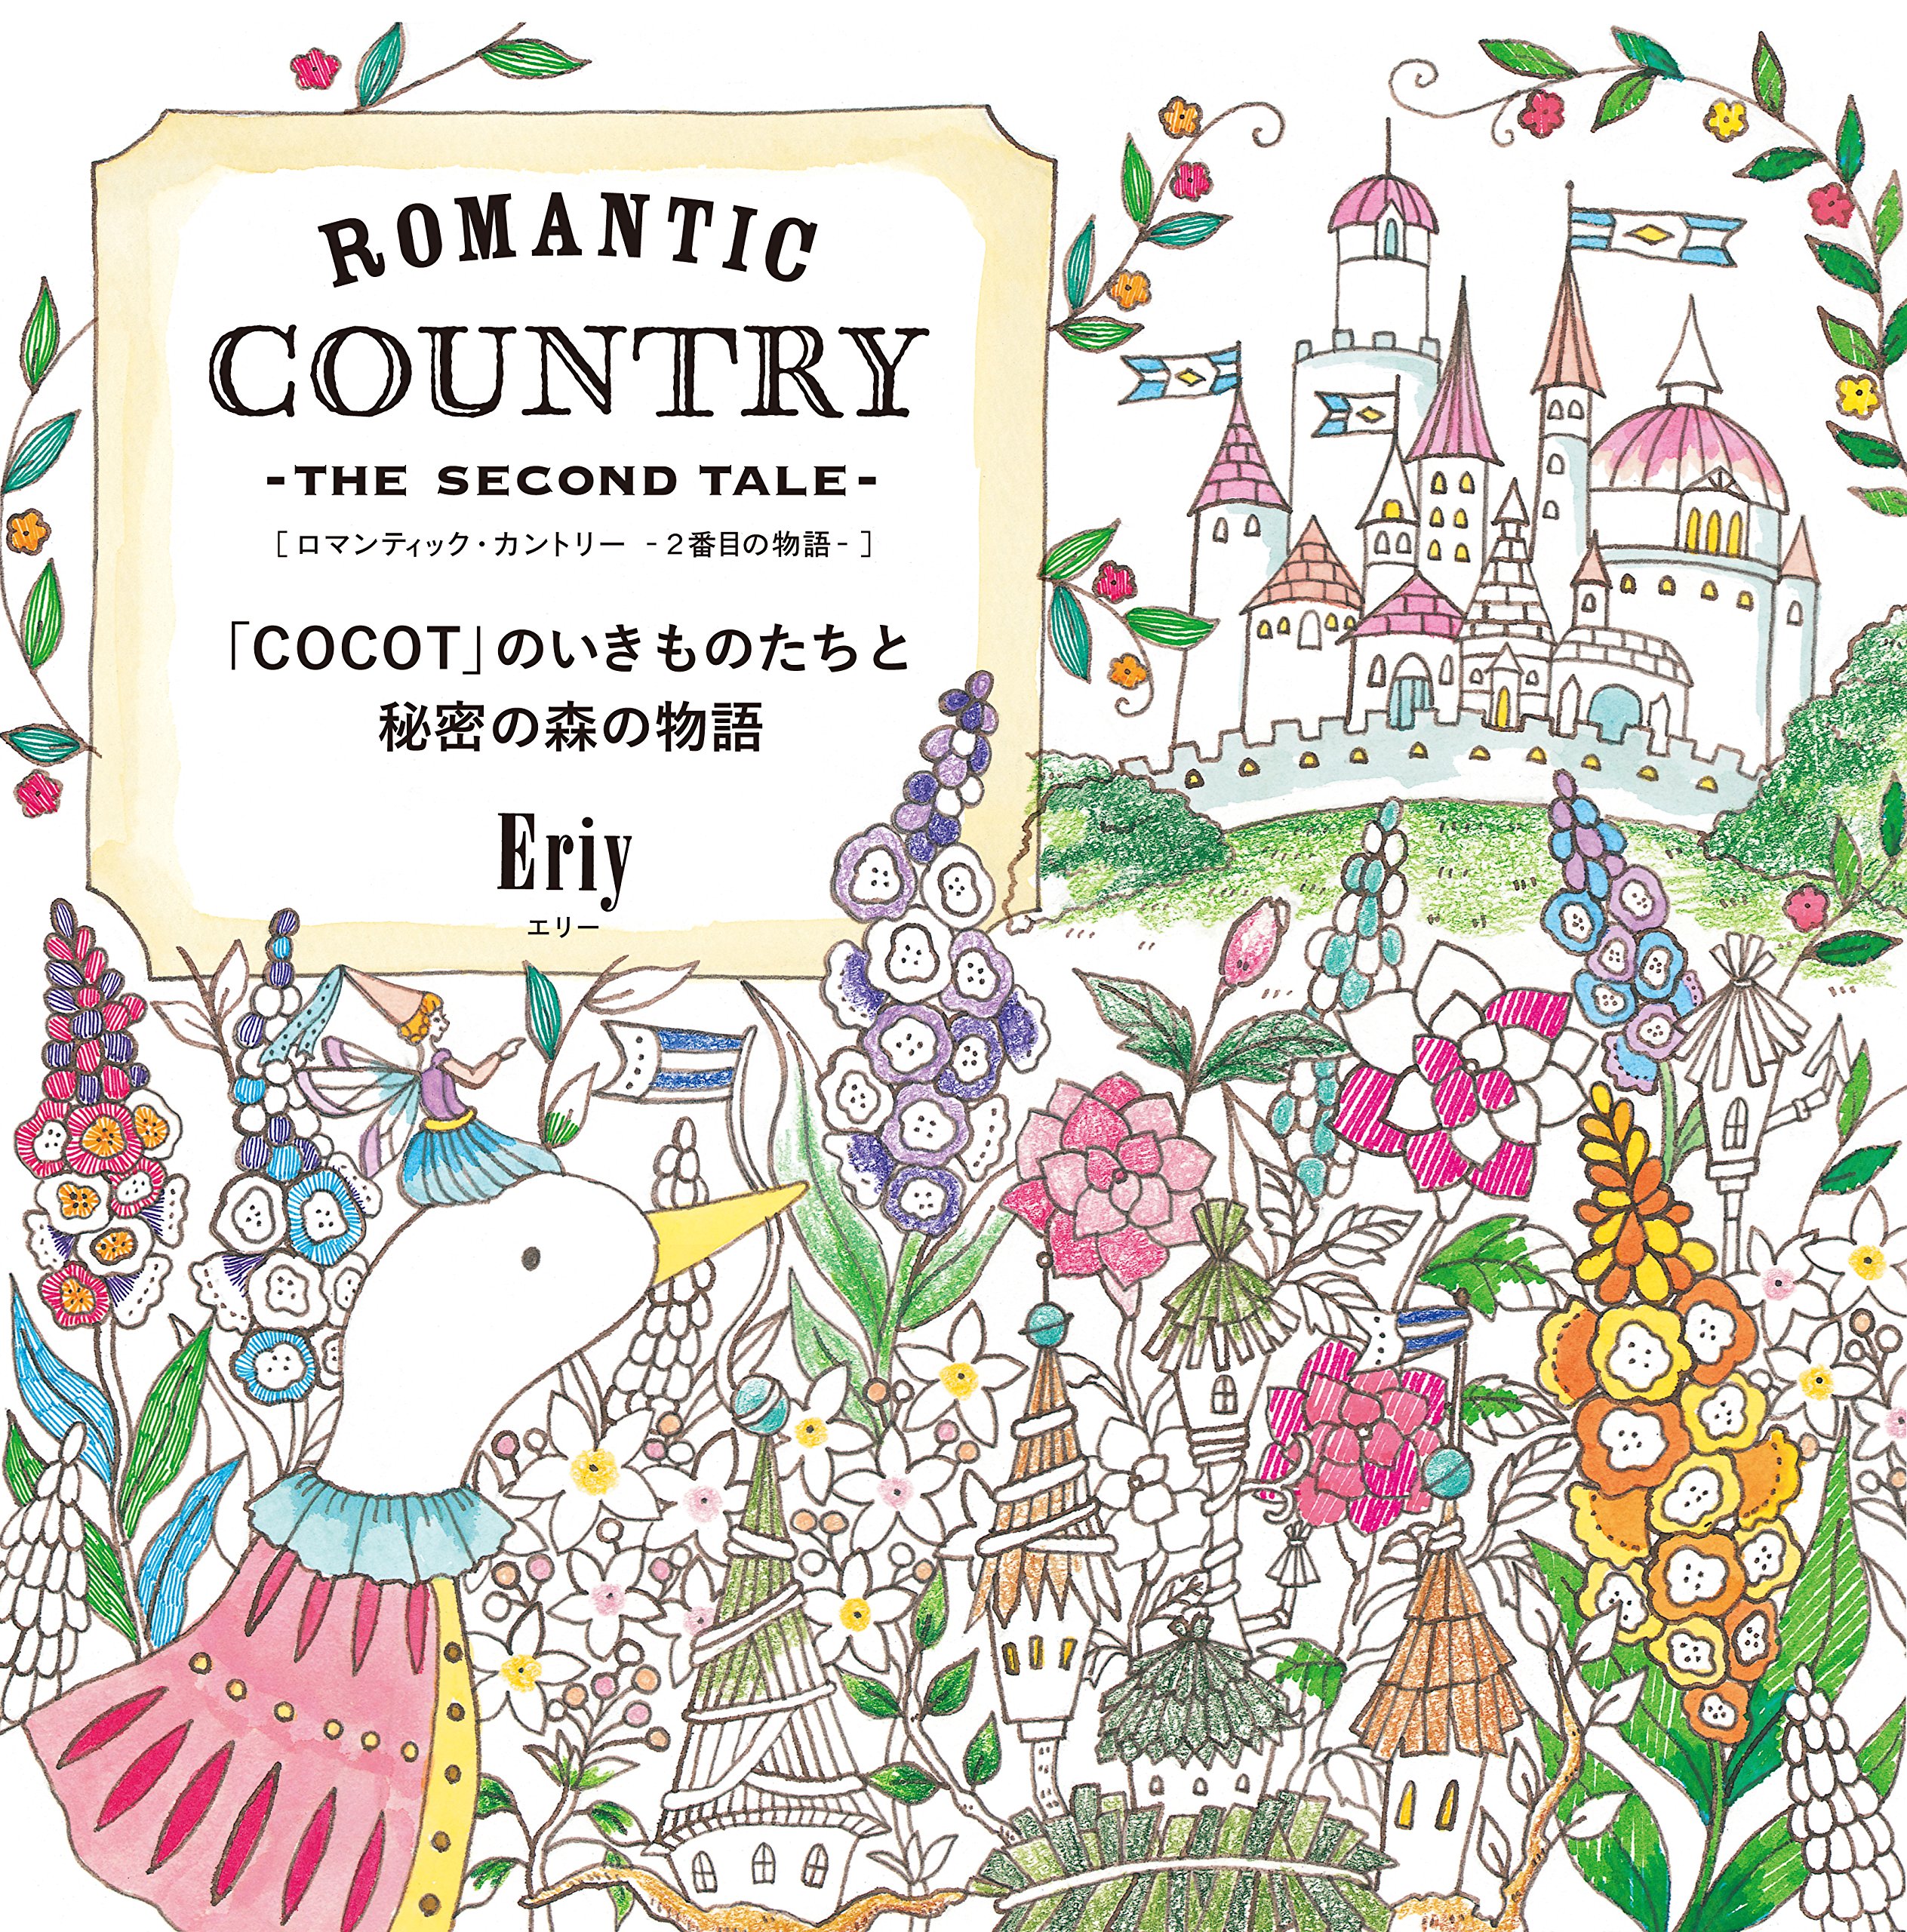 ROMANTIC COUNTRY -THE SECOND TALE-